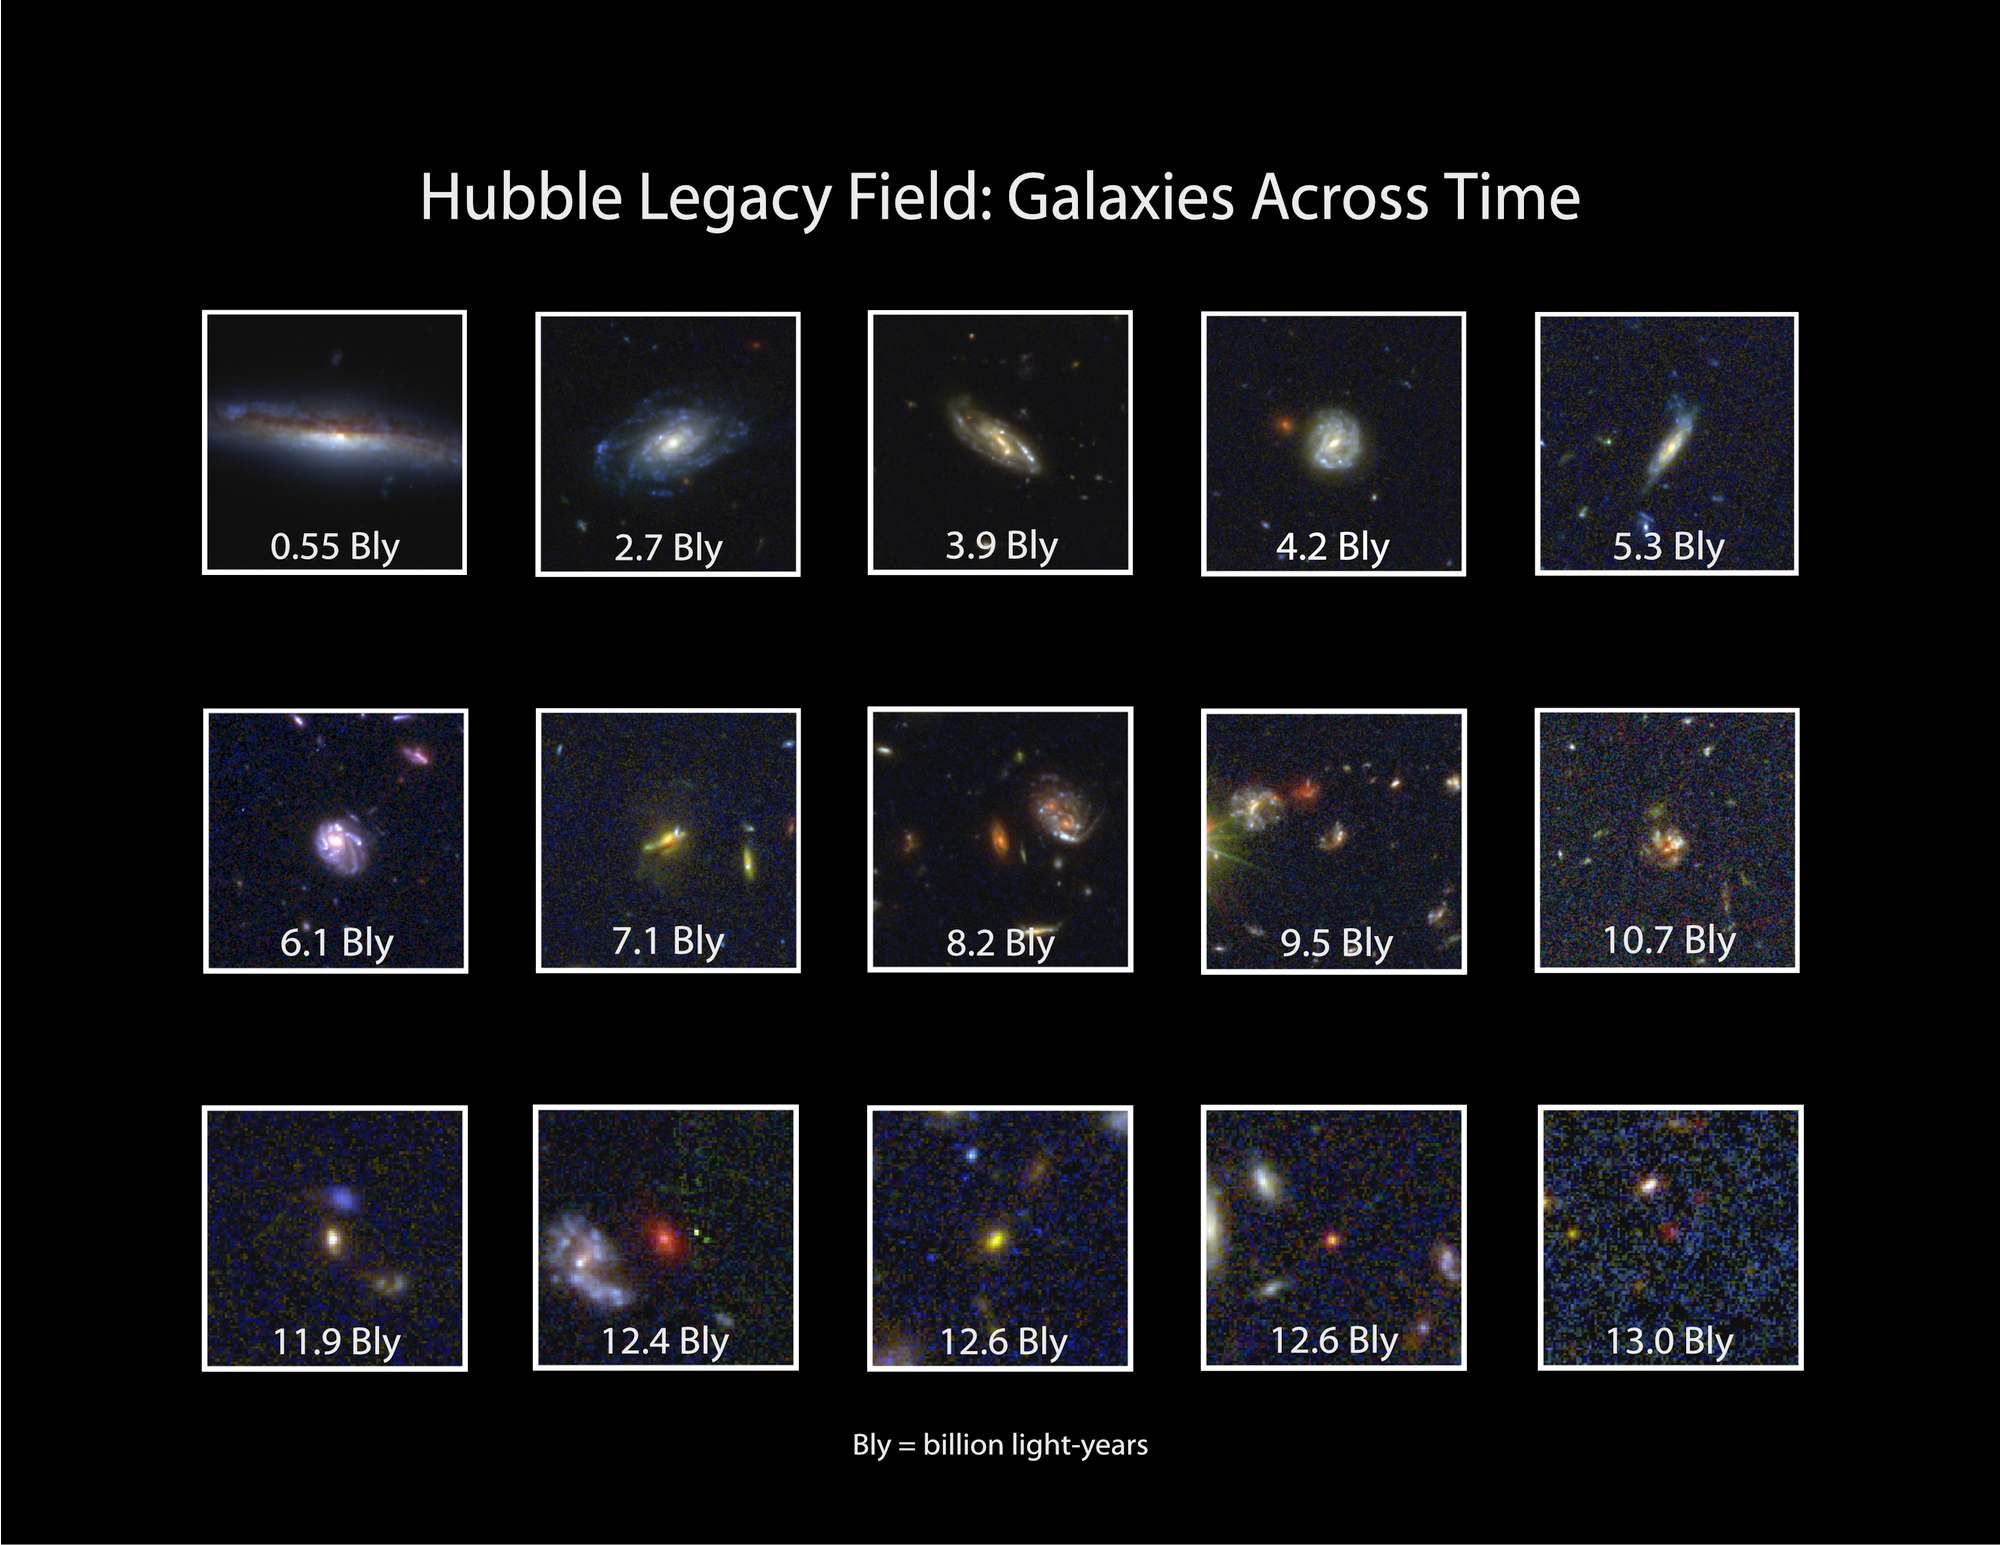 barst overdracht Gelach Astronomers stitch Hubble's hits into 'Legacy Deep Field' image |  Astronomy.com